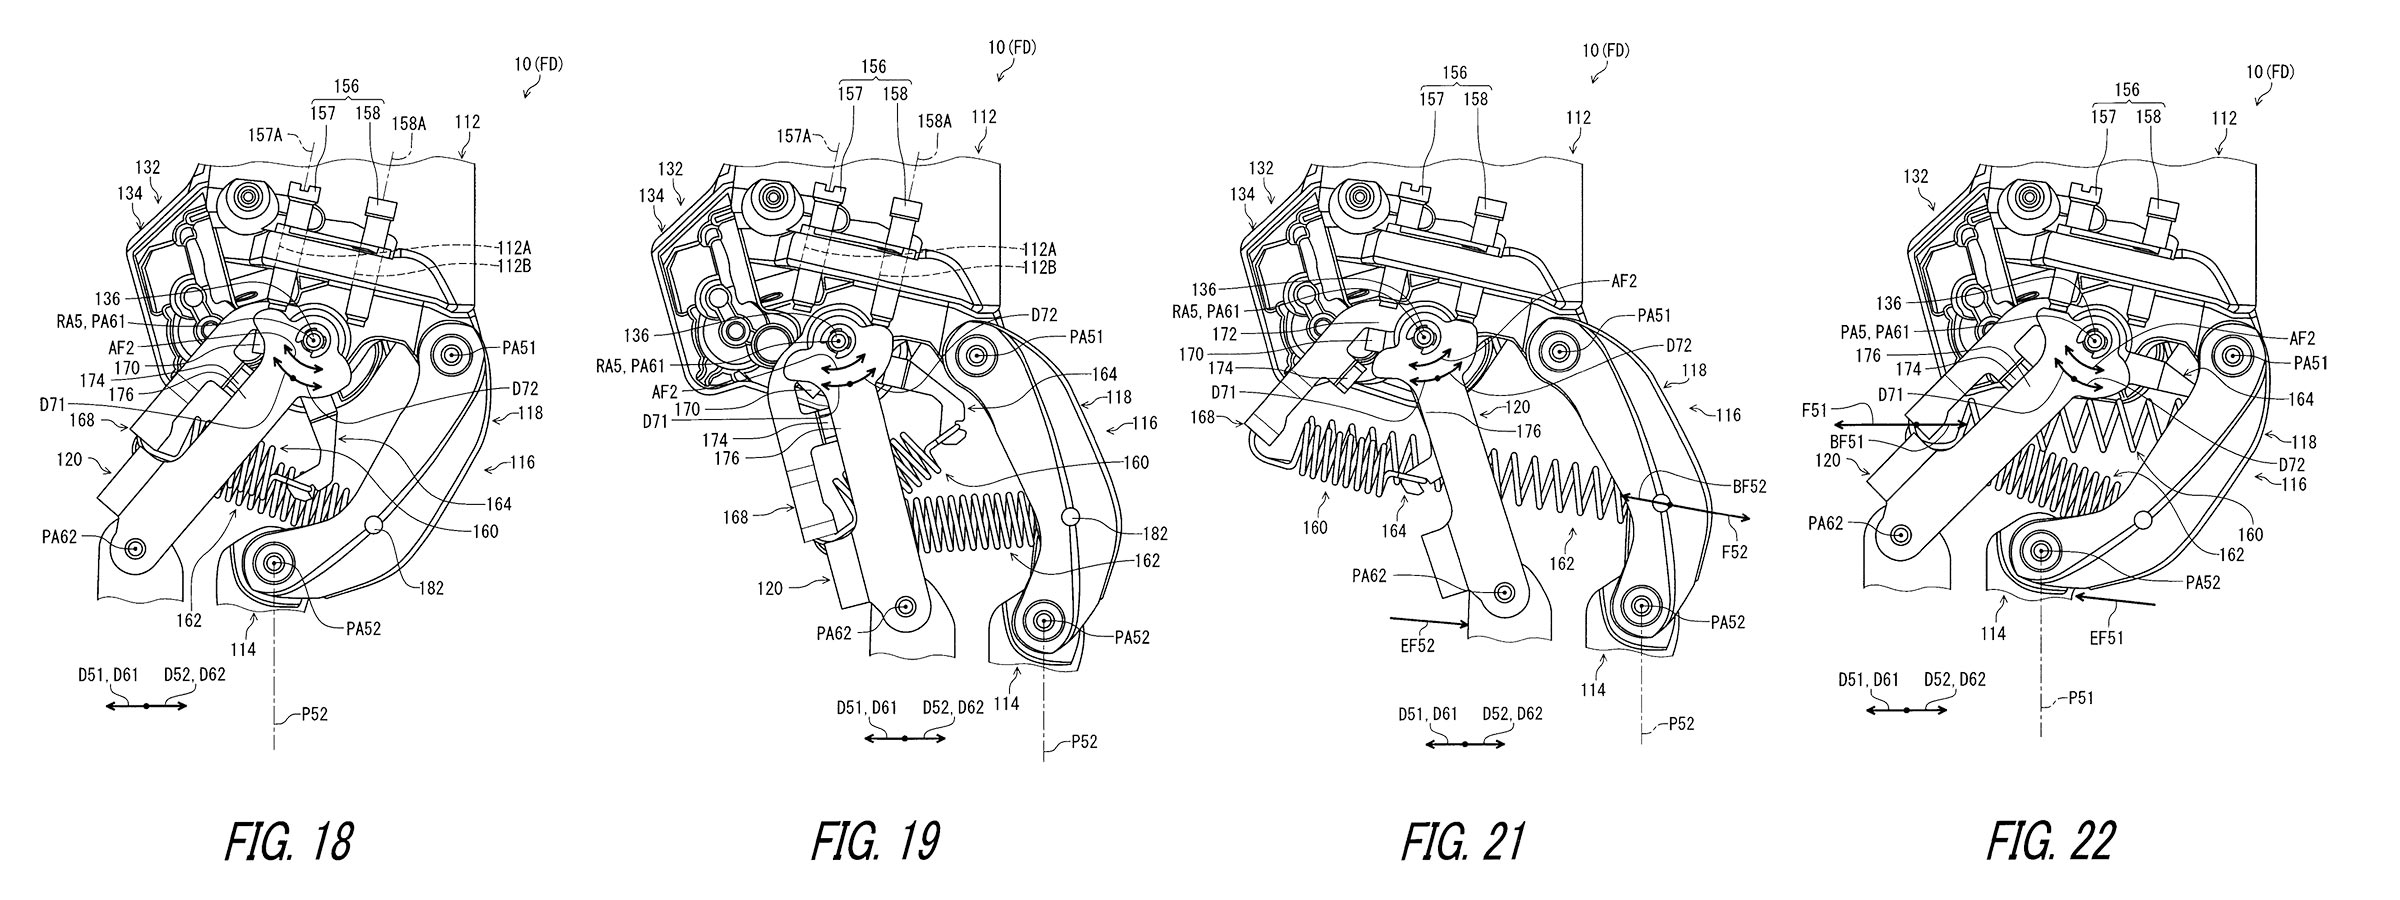 Shimano Di2 patent diagrams of floating impact-resistant electronic-shift rear derailleur